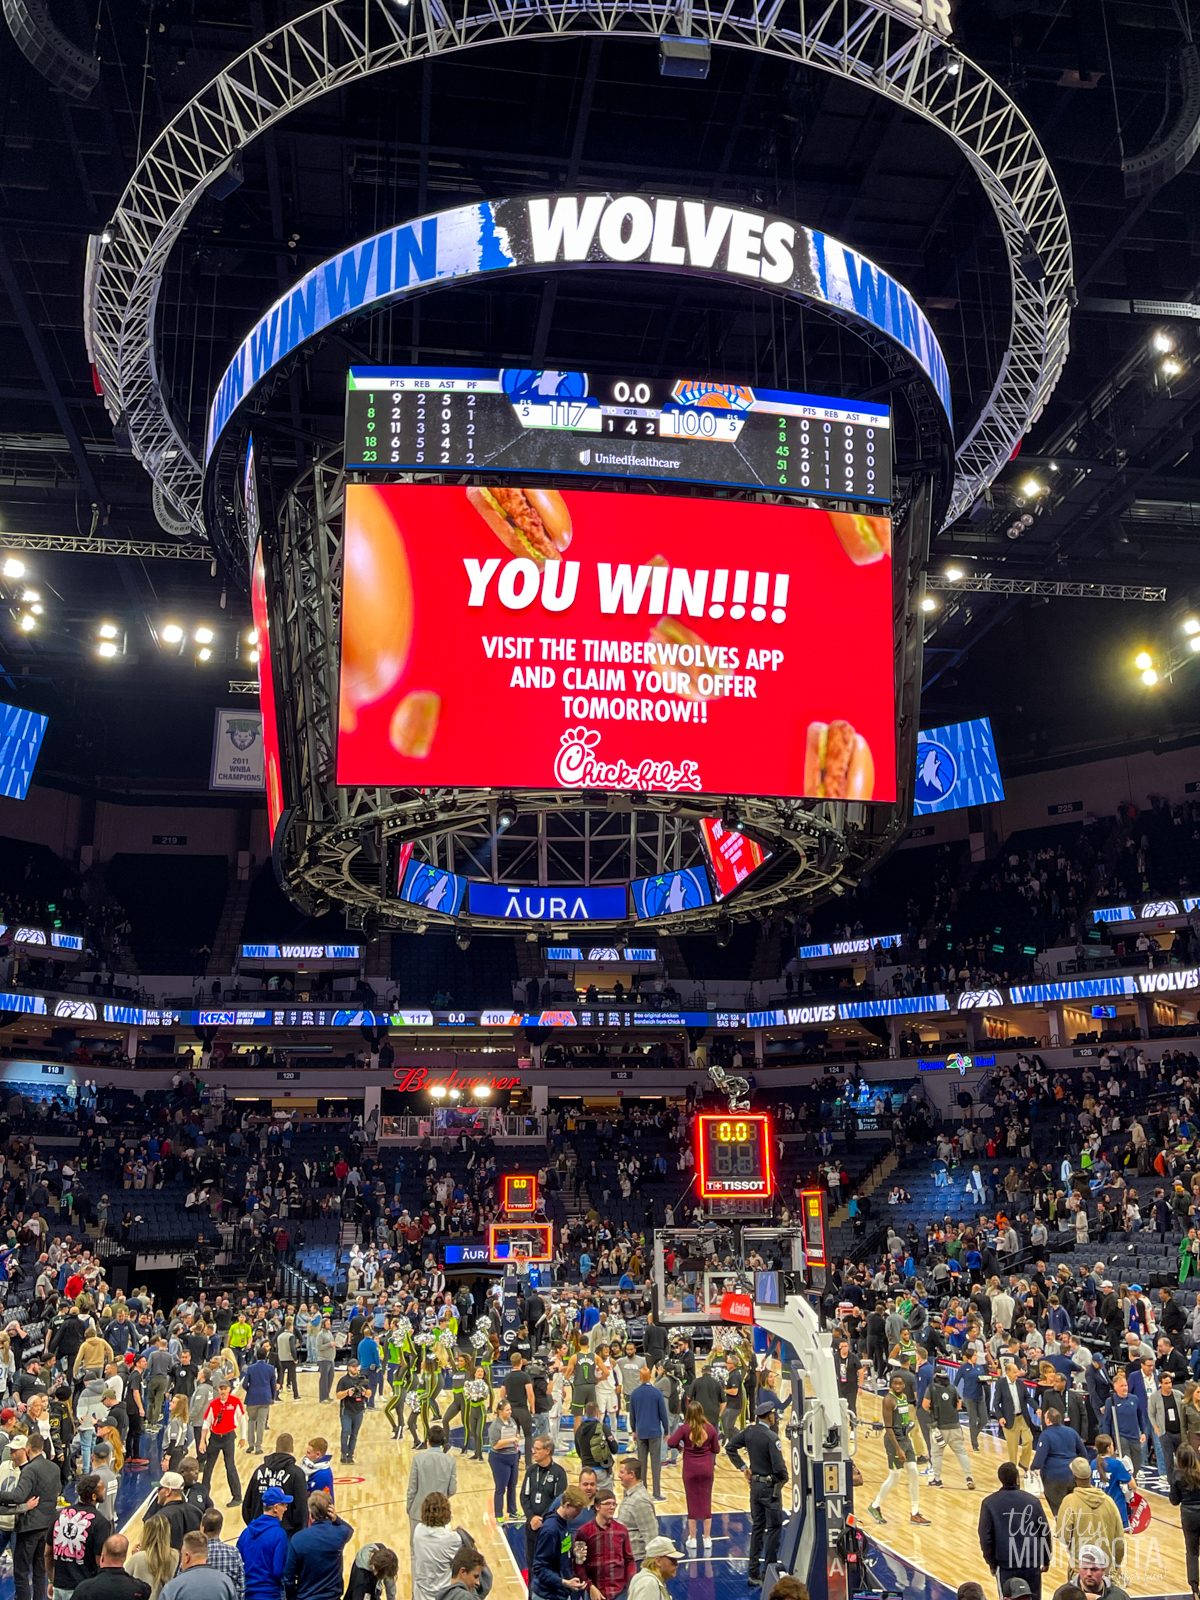 Target Center Minneapolis with Timberwolves Chick-fil-A Offer on the big screen above the court.